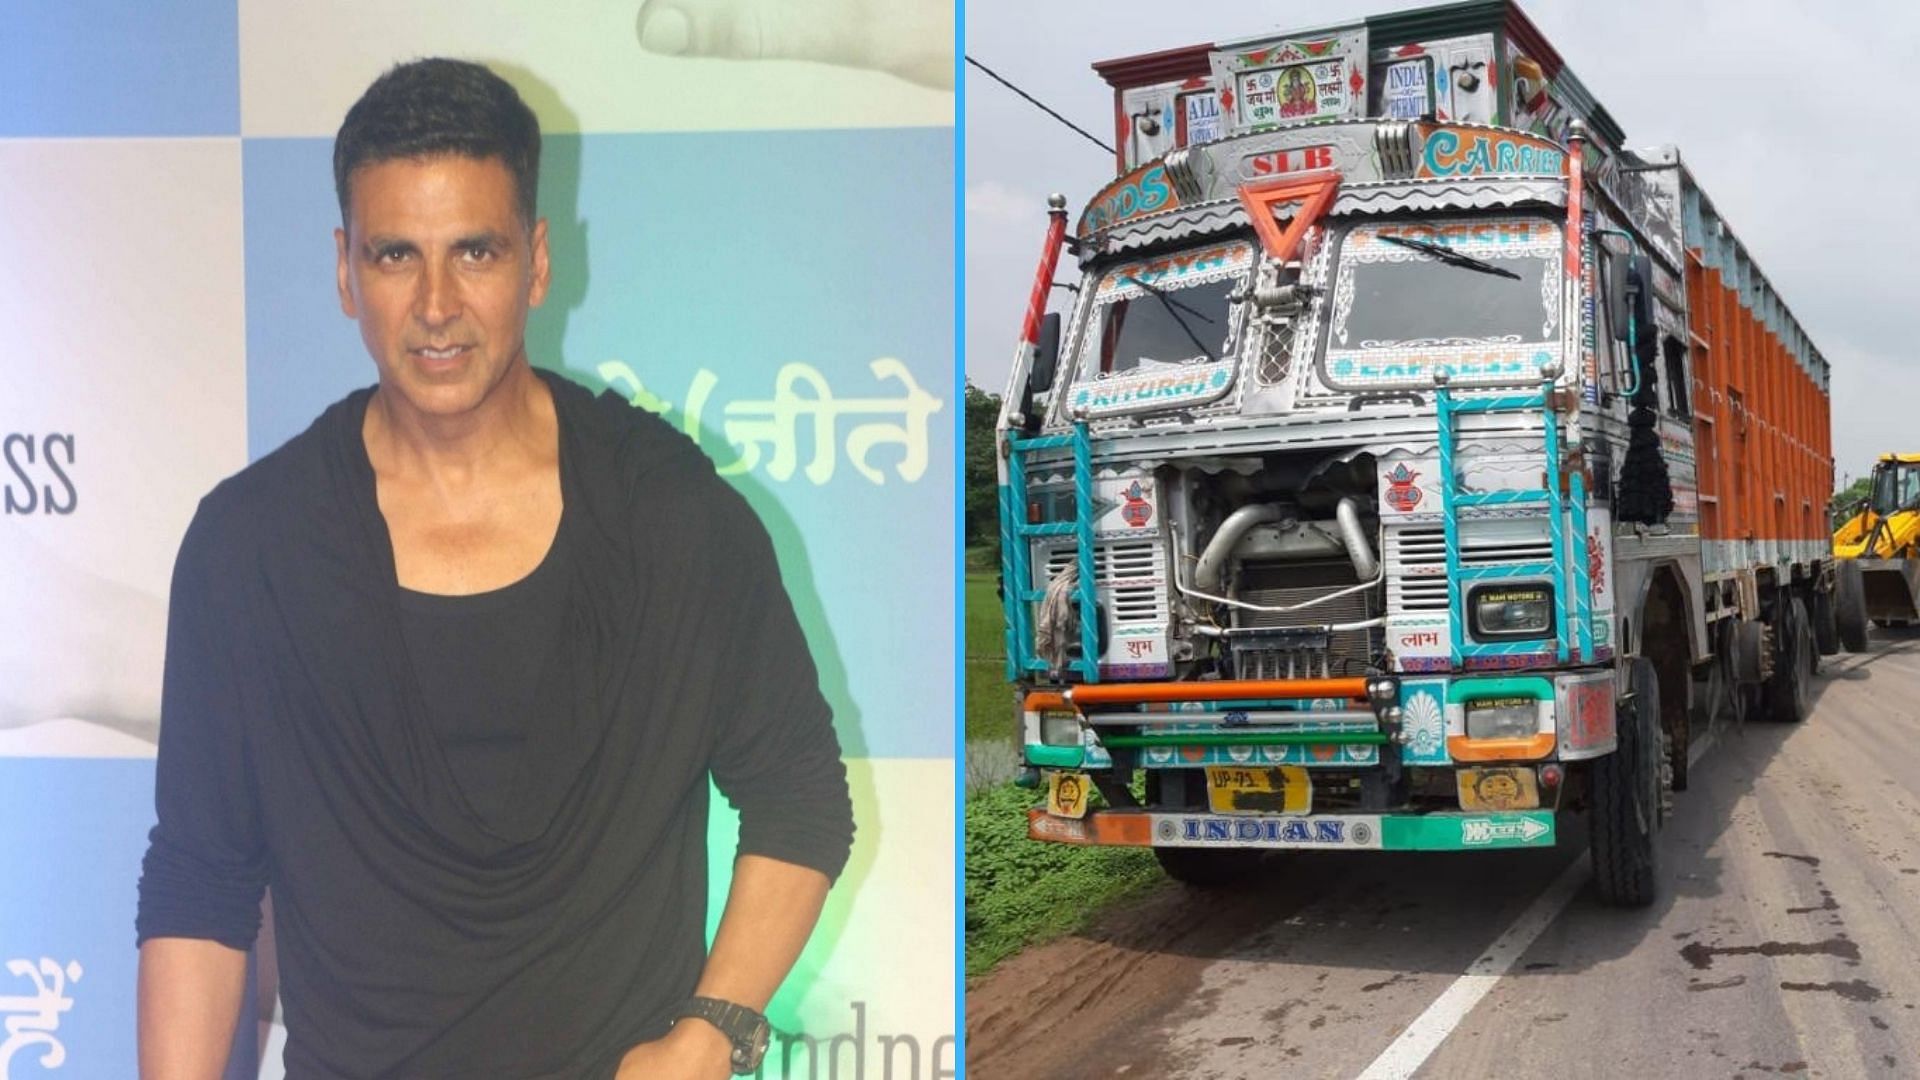 Akshay Kumar has avoided commenting on the recent car-truck collision that injured the Unnao gangrape survivor and her family. &nbsp;